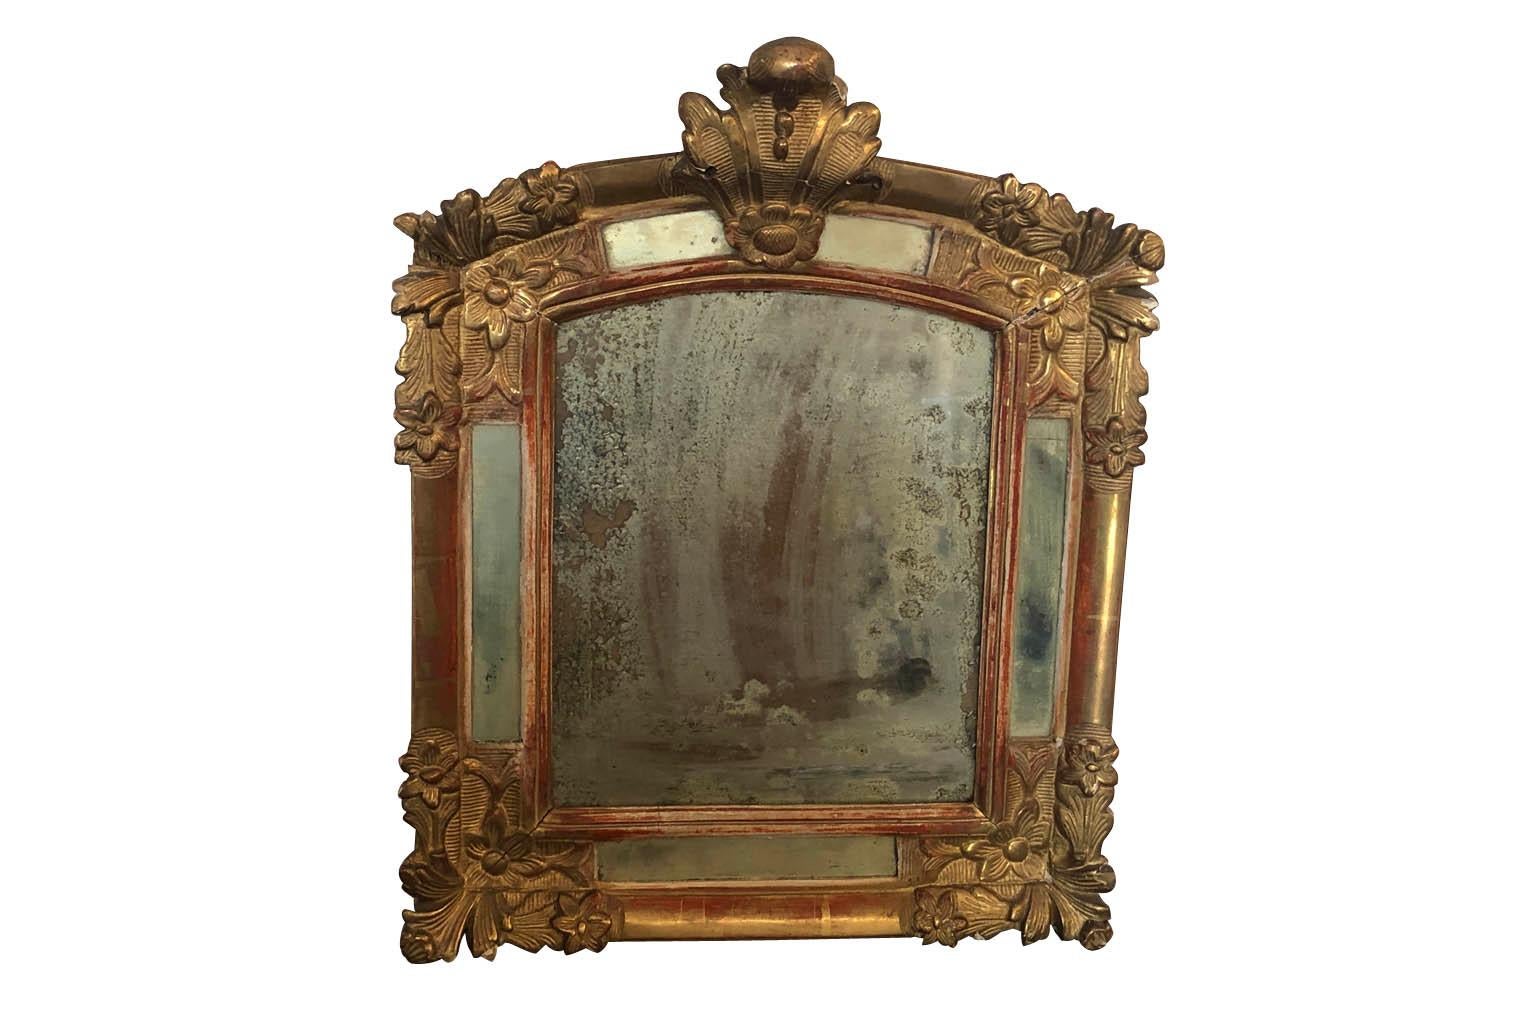 A very beautiful French Louis XV mirror wonderfully constructed from giltwood. The mirror effect is produced with silver leaf instead of mercury. A stunning accent piece.